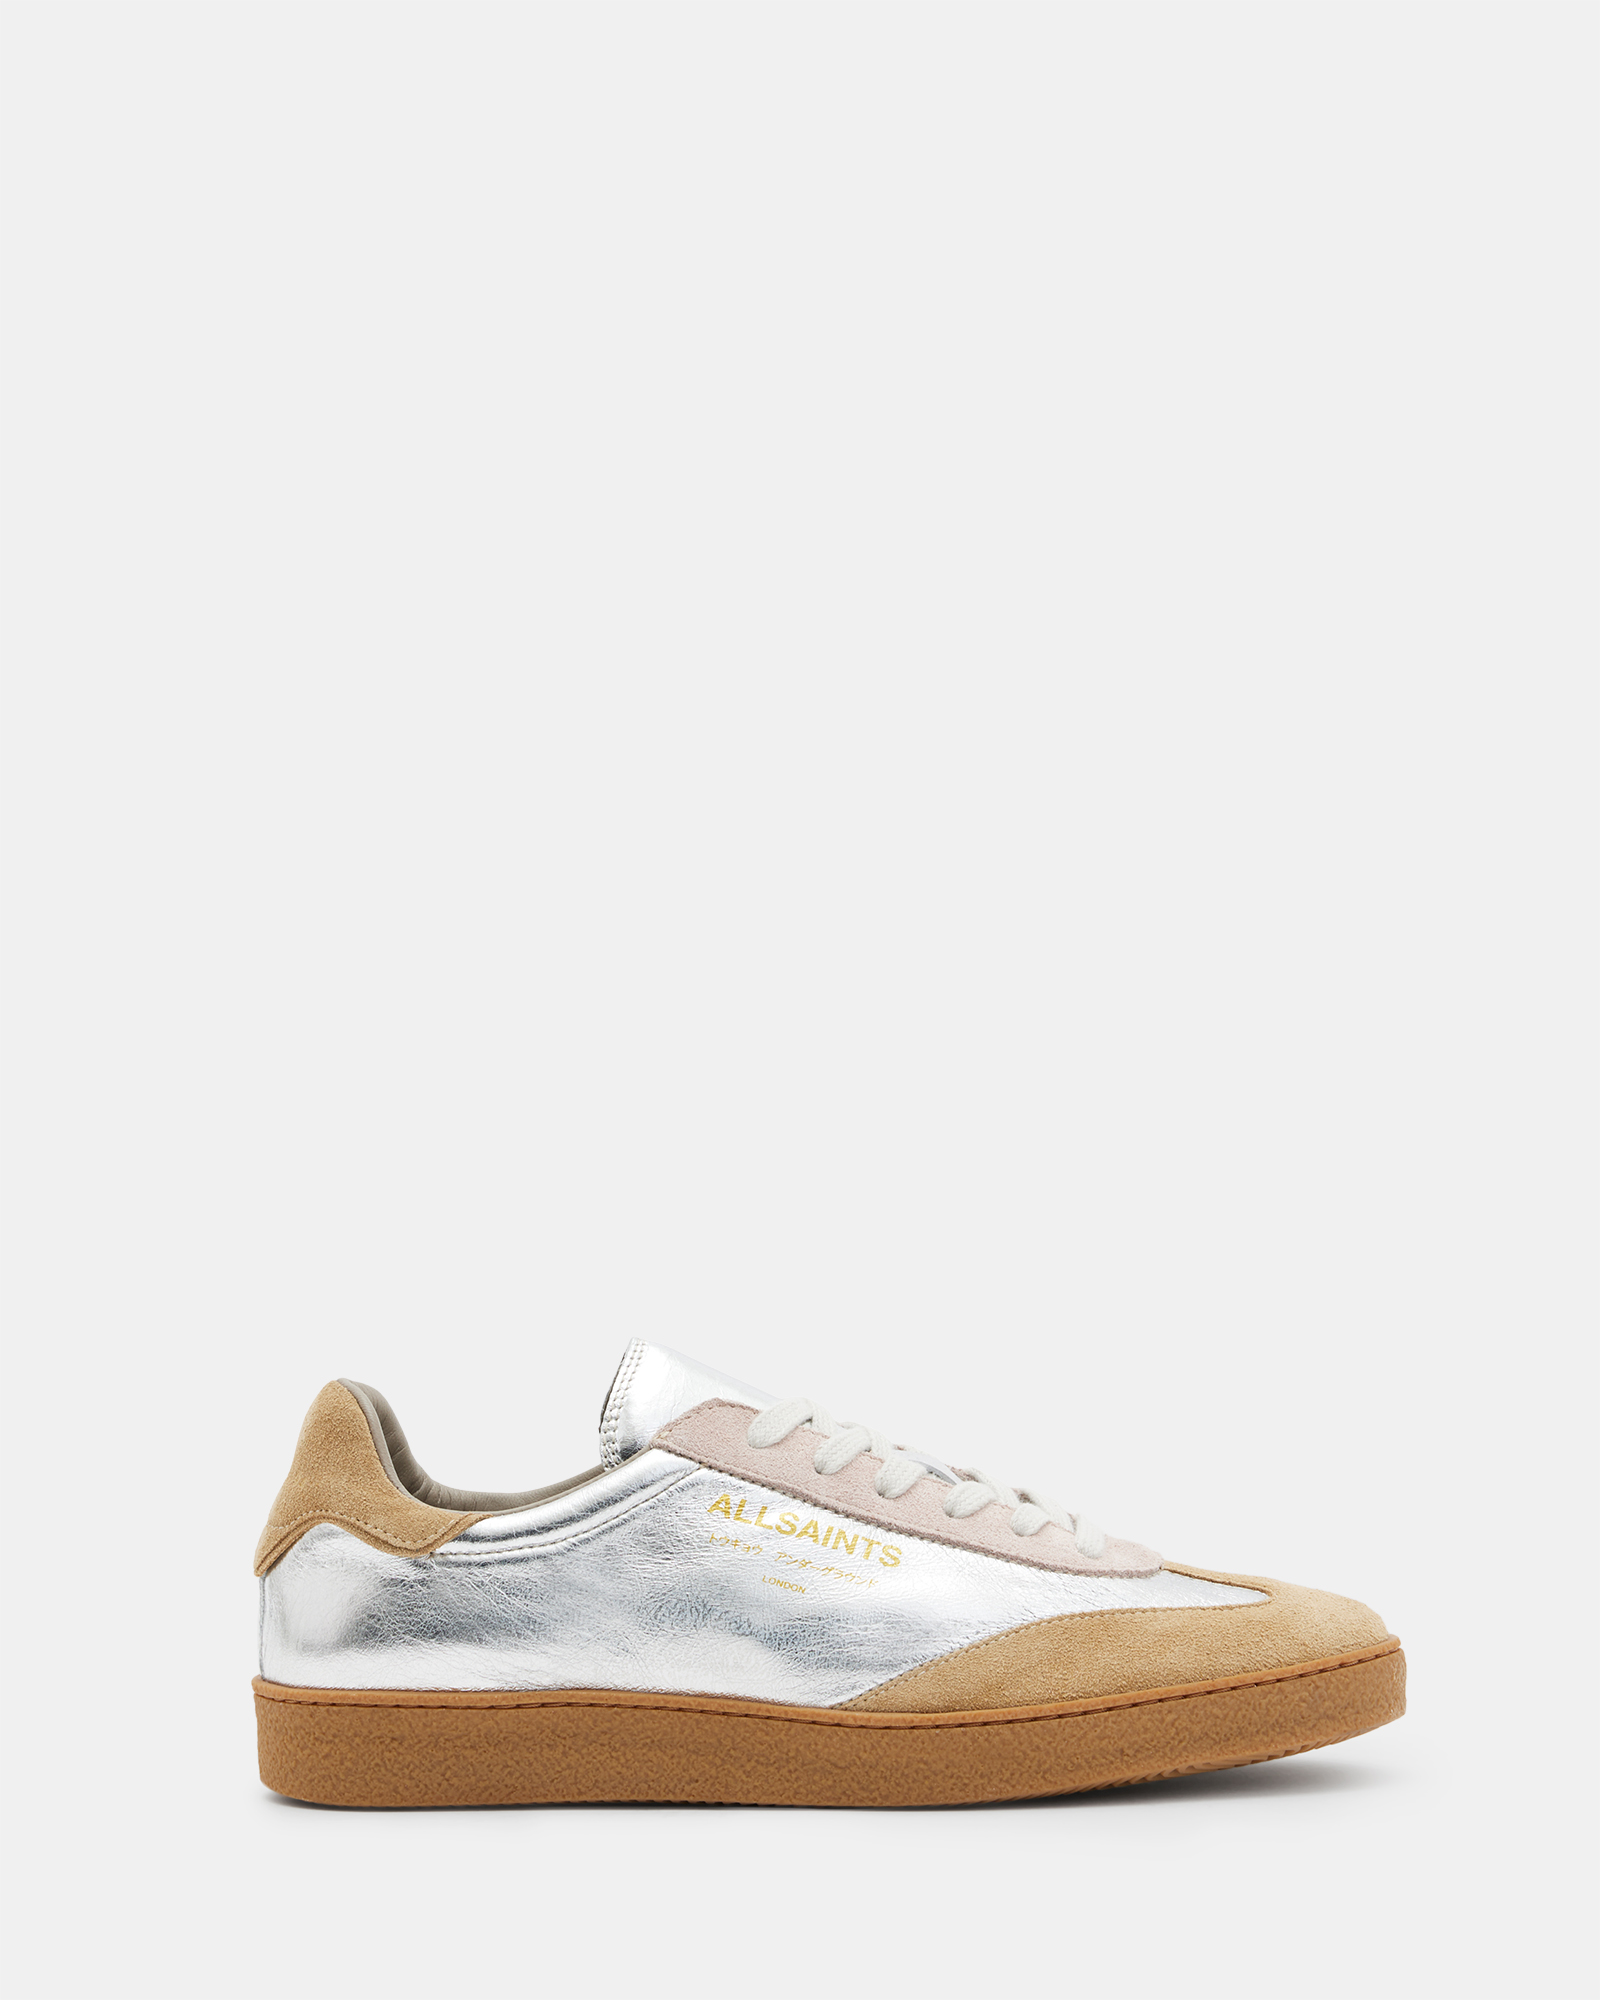 AllSaints Thelma Leather Low Top Trainers,, SILVER/ROSE PINK